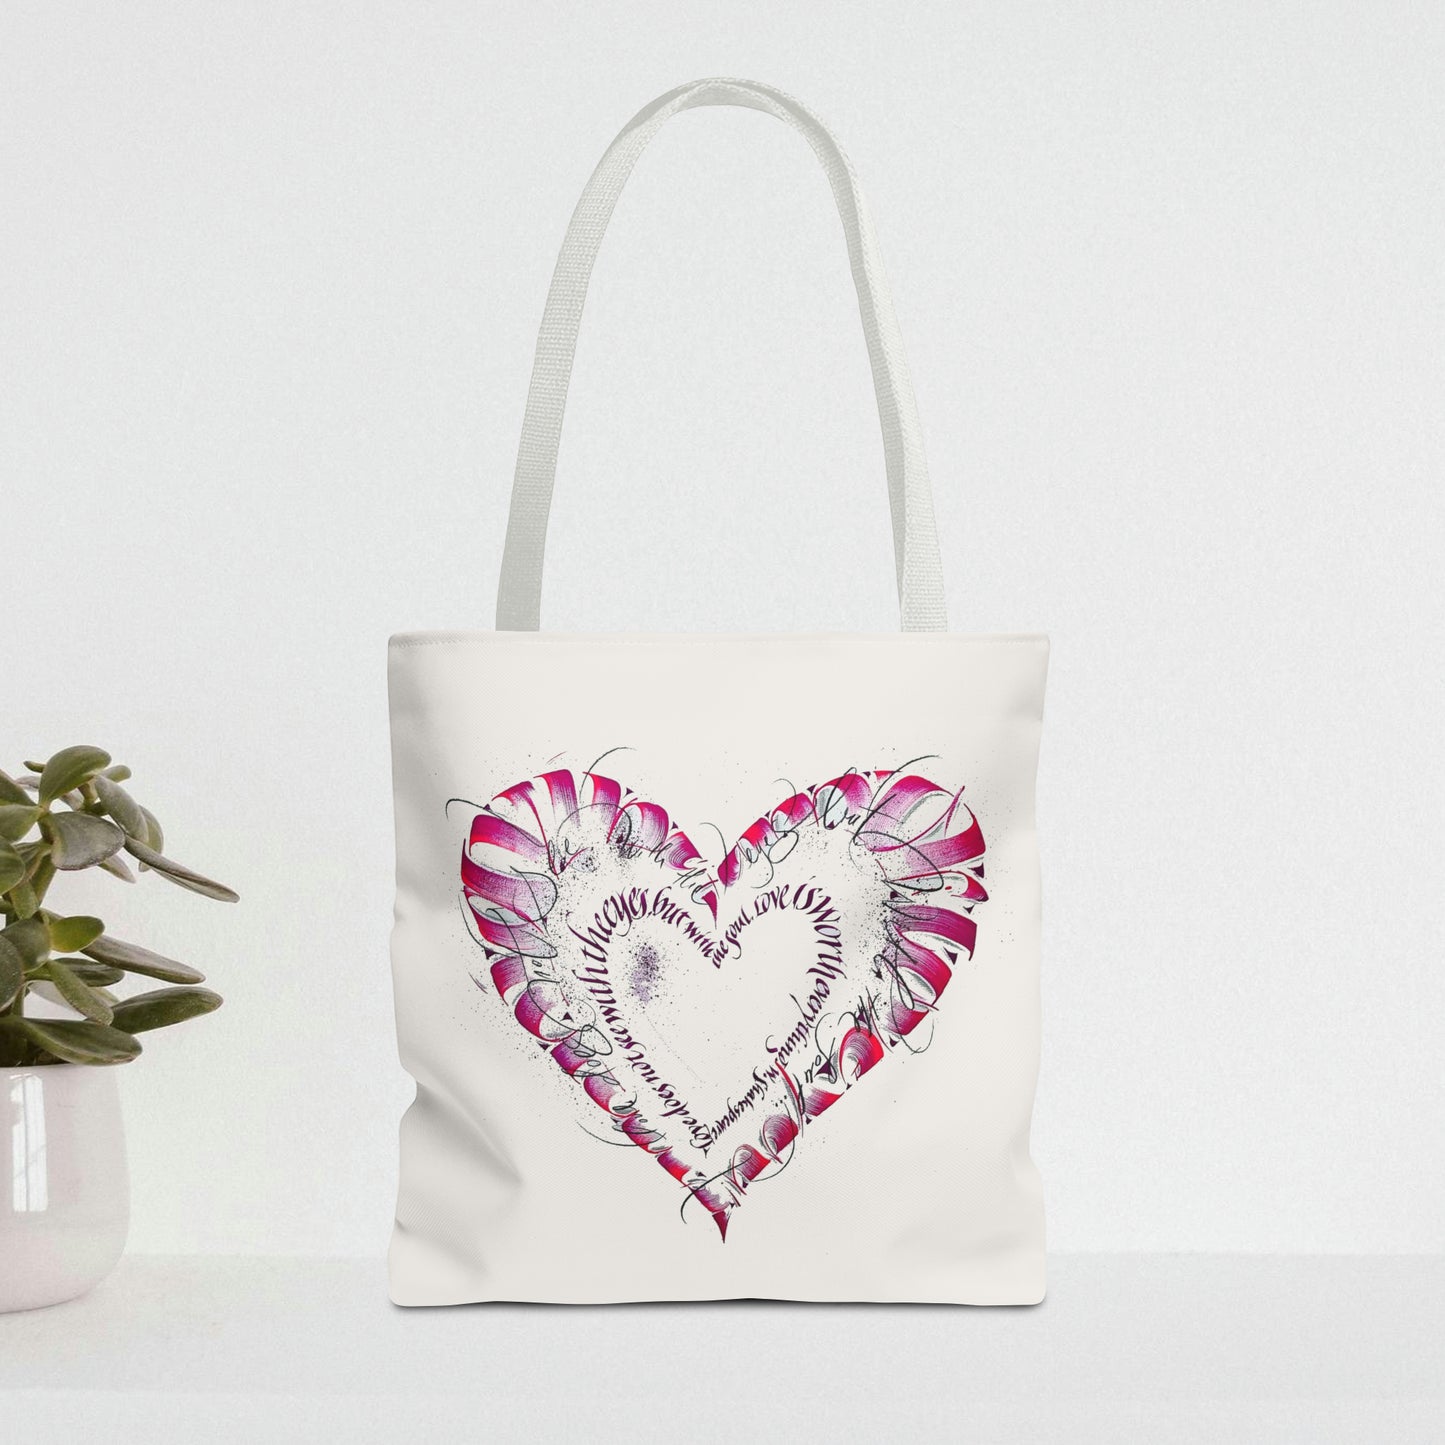 Tote Bag -  "Love doesn't see with the eyes"